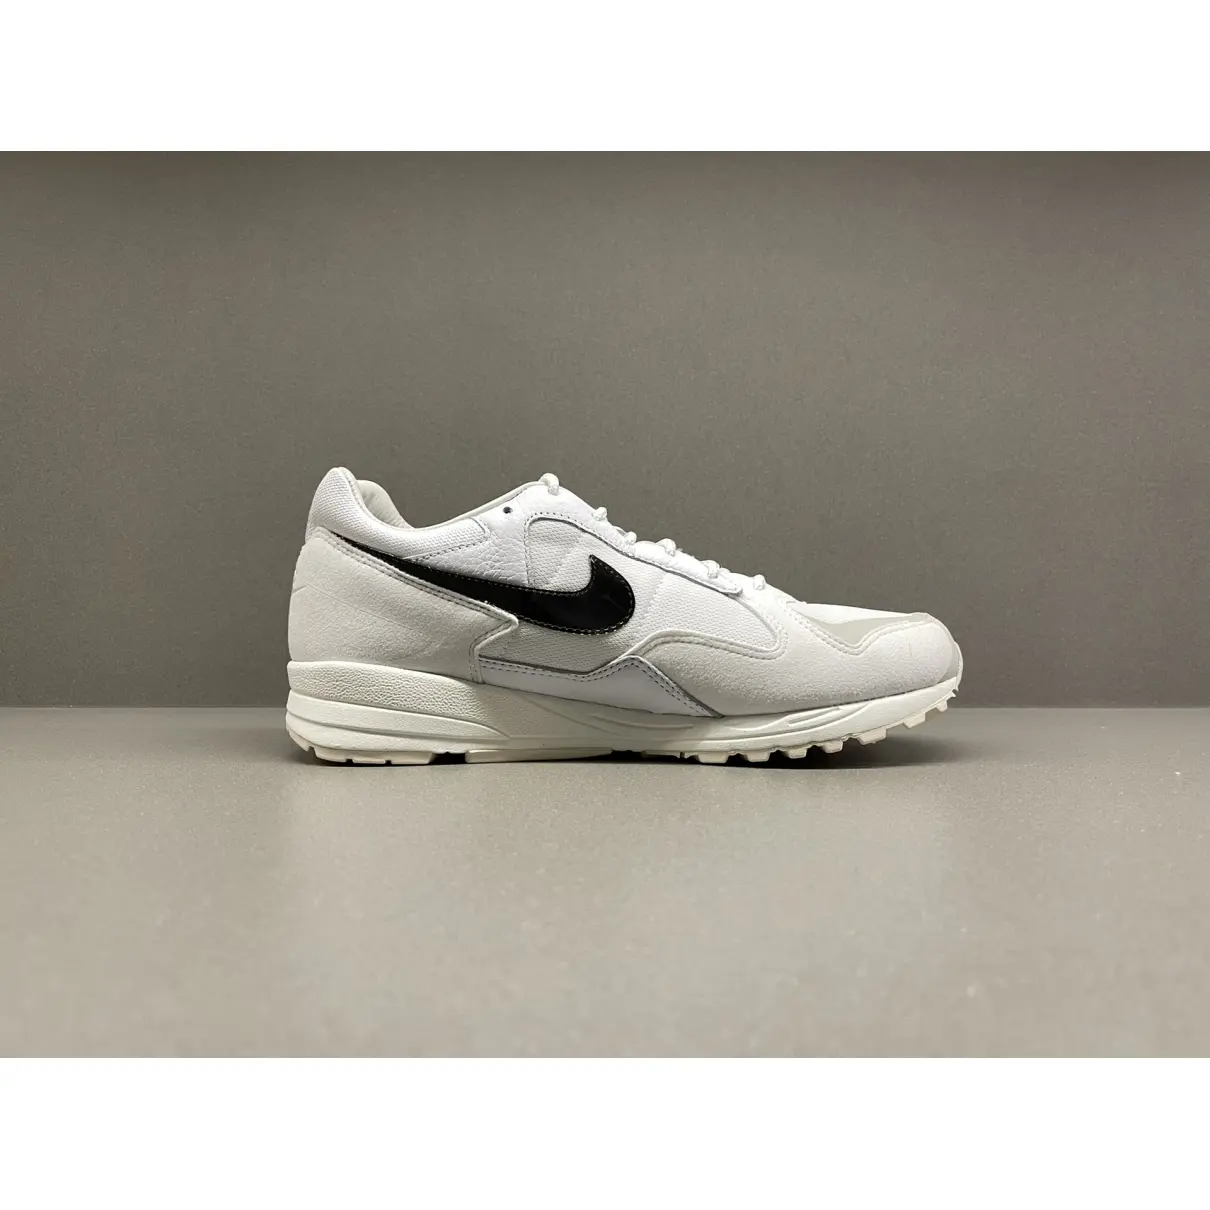 Air Skylon 2 leather low trainers Nike x Fear of God